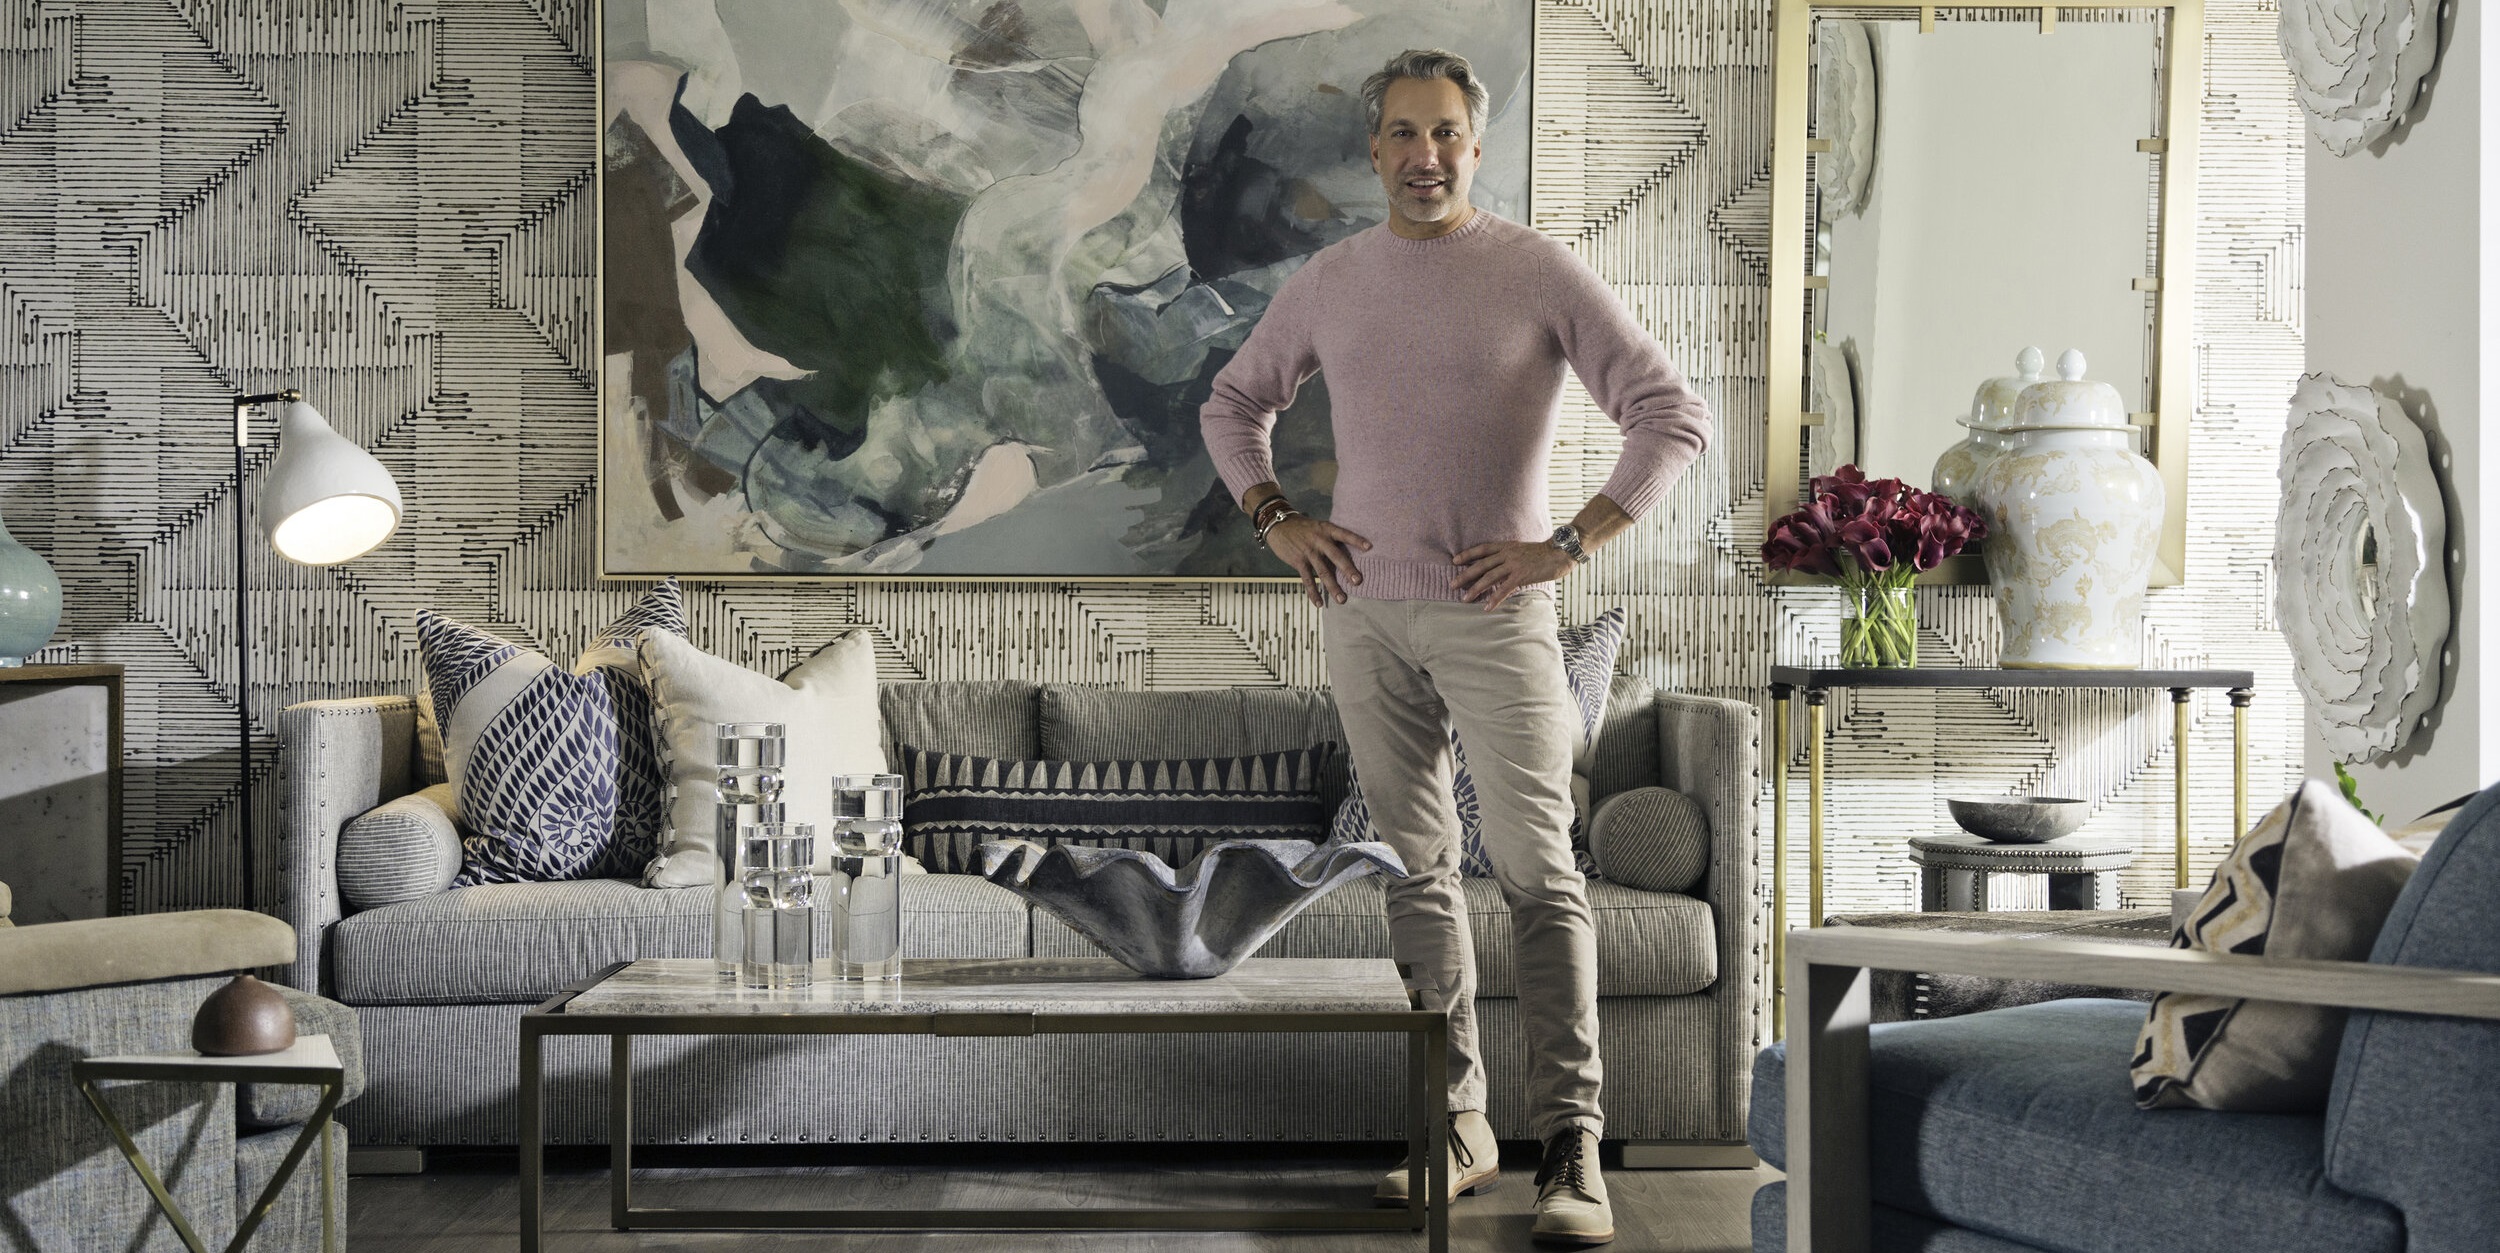 Thom Filicia standing in a room he designed